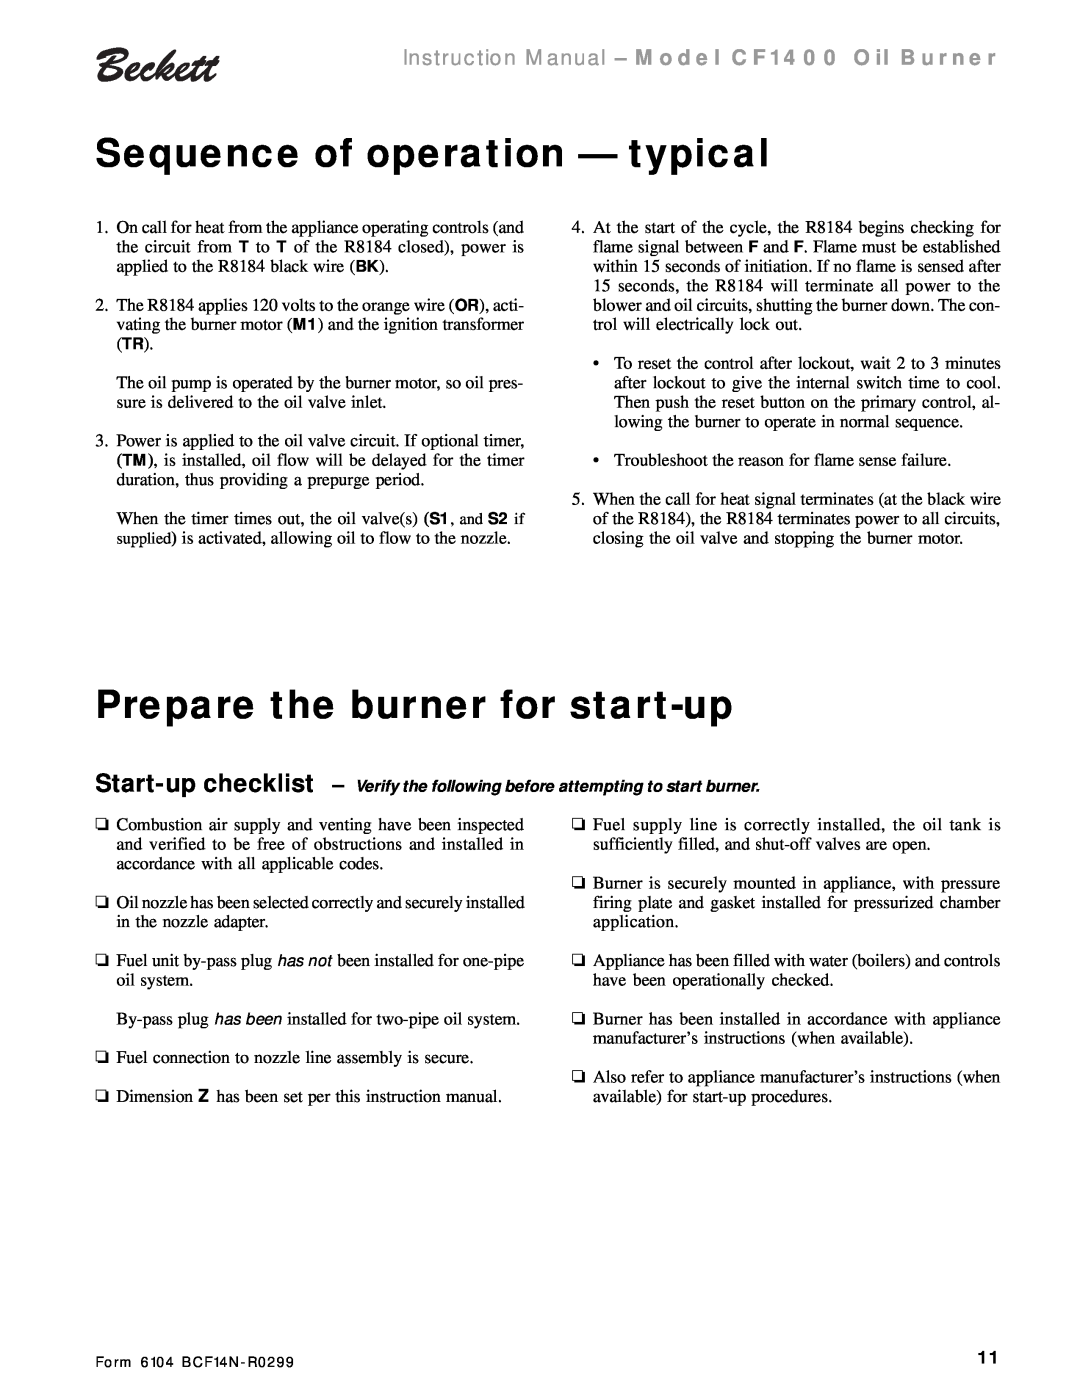 Beckett CF 1400 instruction manual Sequence of operation - typical, Prepare the burner for start-up 